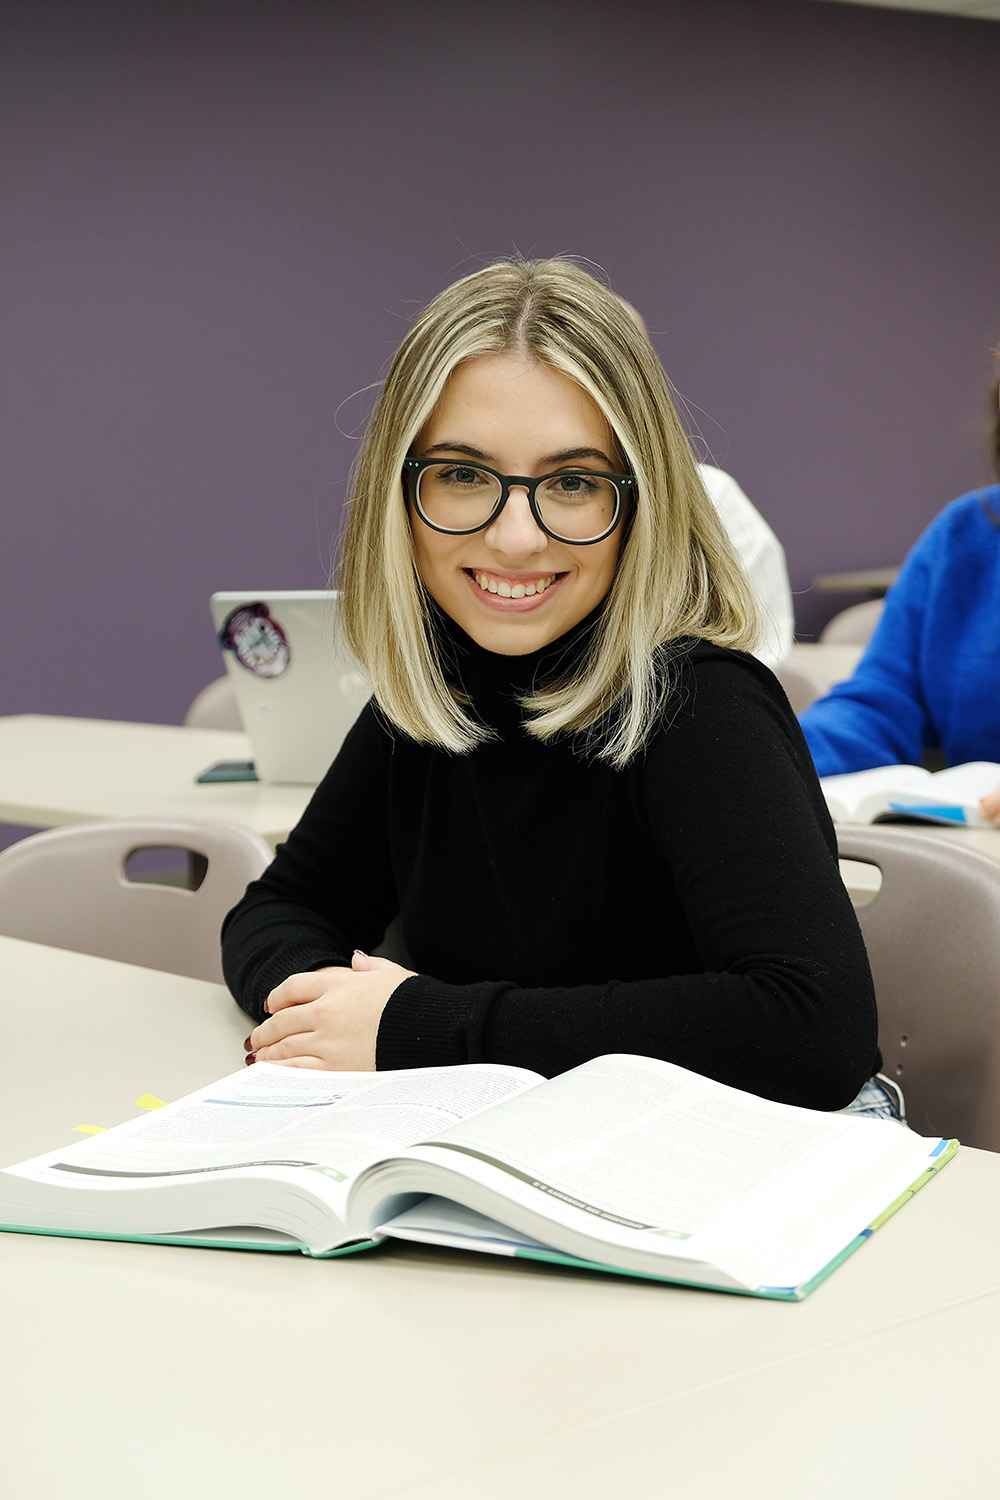 A woman sitting at a desk looks up from her textbook to smile at the camera.